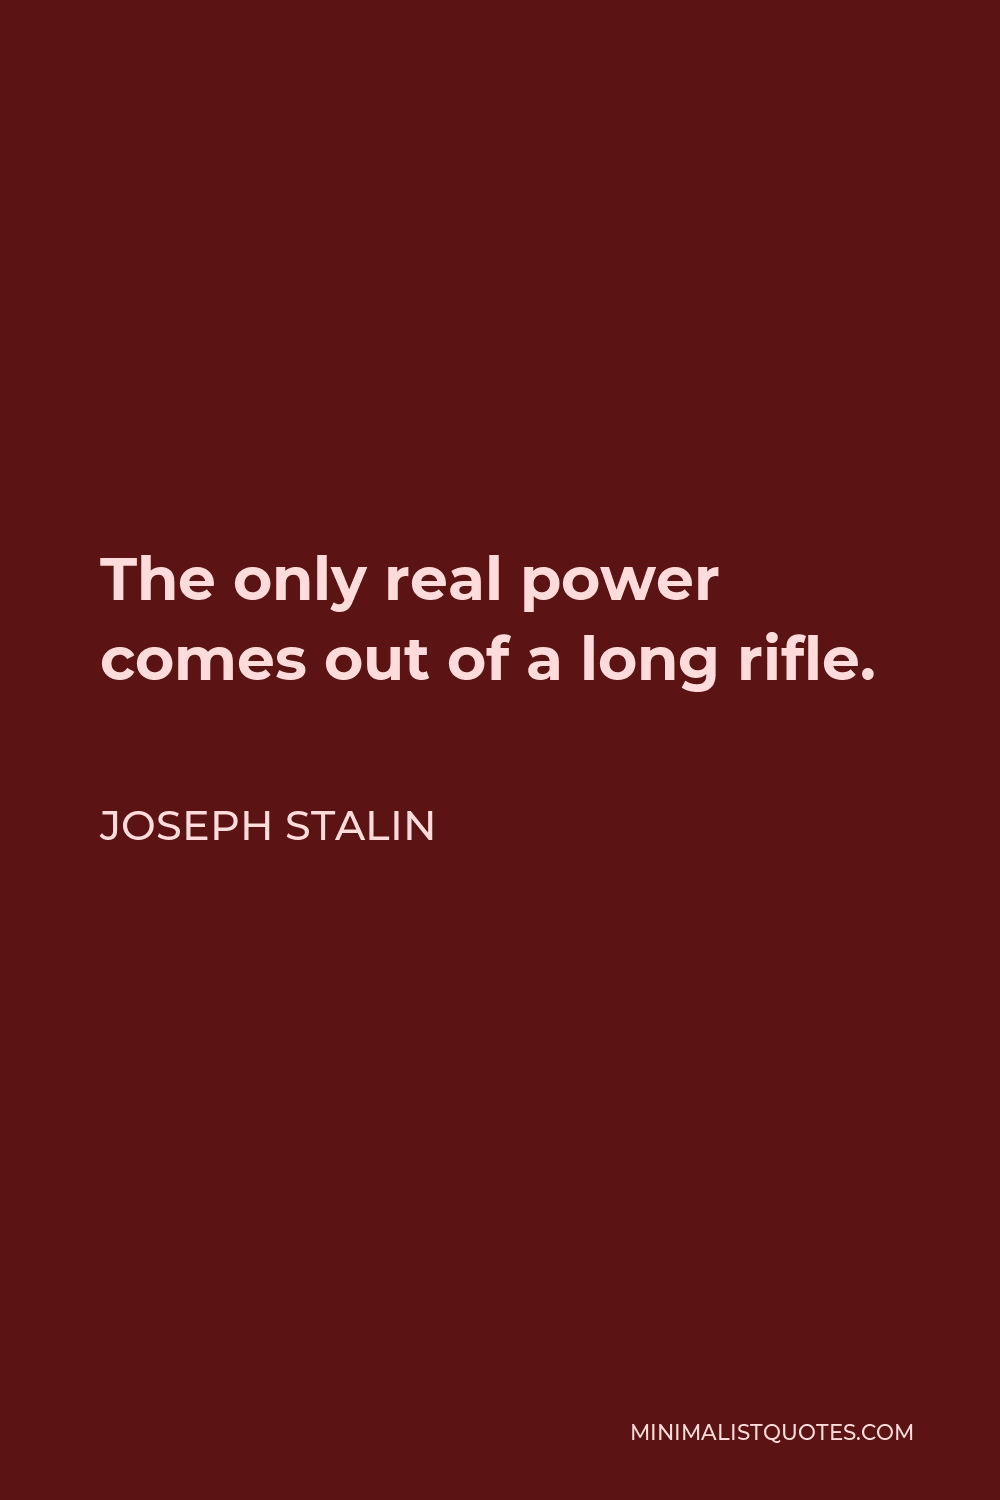 Joseph Stalin Quote - The only real power comes out of a long rifle.